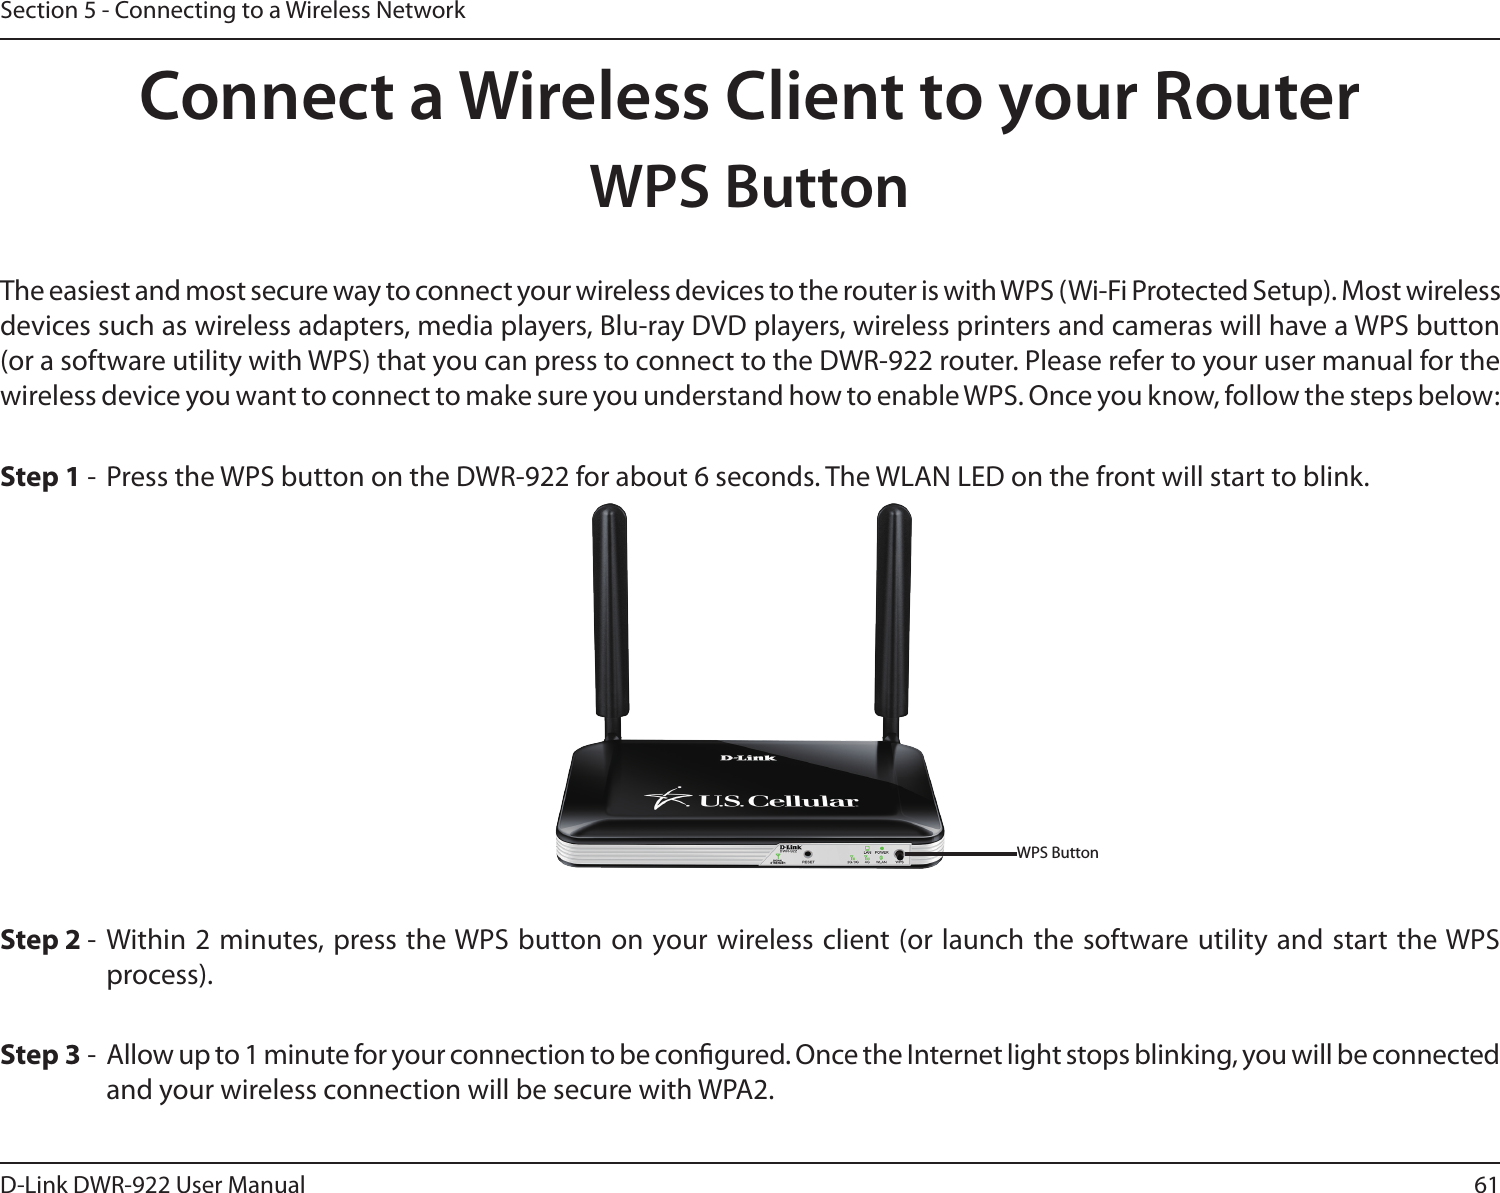 61D-Link DWR-922 User ManualSection 5 - Connecting to a Wireless NetworkConnect a Wireless Client to your RouterWPS ButtonStep 2 - Within 2 minutes, press the WPS button on your wireless client (or launch the software utility and start the WPS process).The easiest and most secure way to connect your wireless devices to the router is with WPS (Wi-Fi Protected Setup). Most wireless devices such as wireless adapters, media players, Blu-ray DVD players, wireless printers and cameras will have a WPS button (or a software utility with WPS) that you can press to connect to the DWR-922 router. Please refer to your user manual for the wireless device you want to connect to make sure you understand how to enable WPS. Once you know, follow the steps below:Step 1 -  Press the WPS button on the DWR-922 for about 6 seconds. The WLAN LED on the front will start to blink.Step 3 -  Allow up to 1 minute for your connection to be congured. Once the Internet light stops blinking, you will be connected and your wireless connection will be secure with WPA2.WPS Button